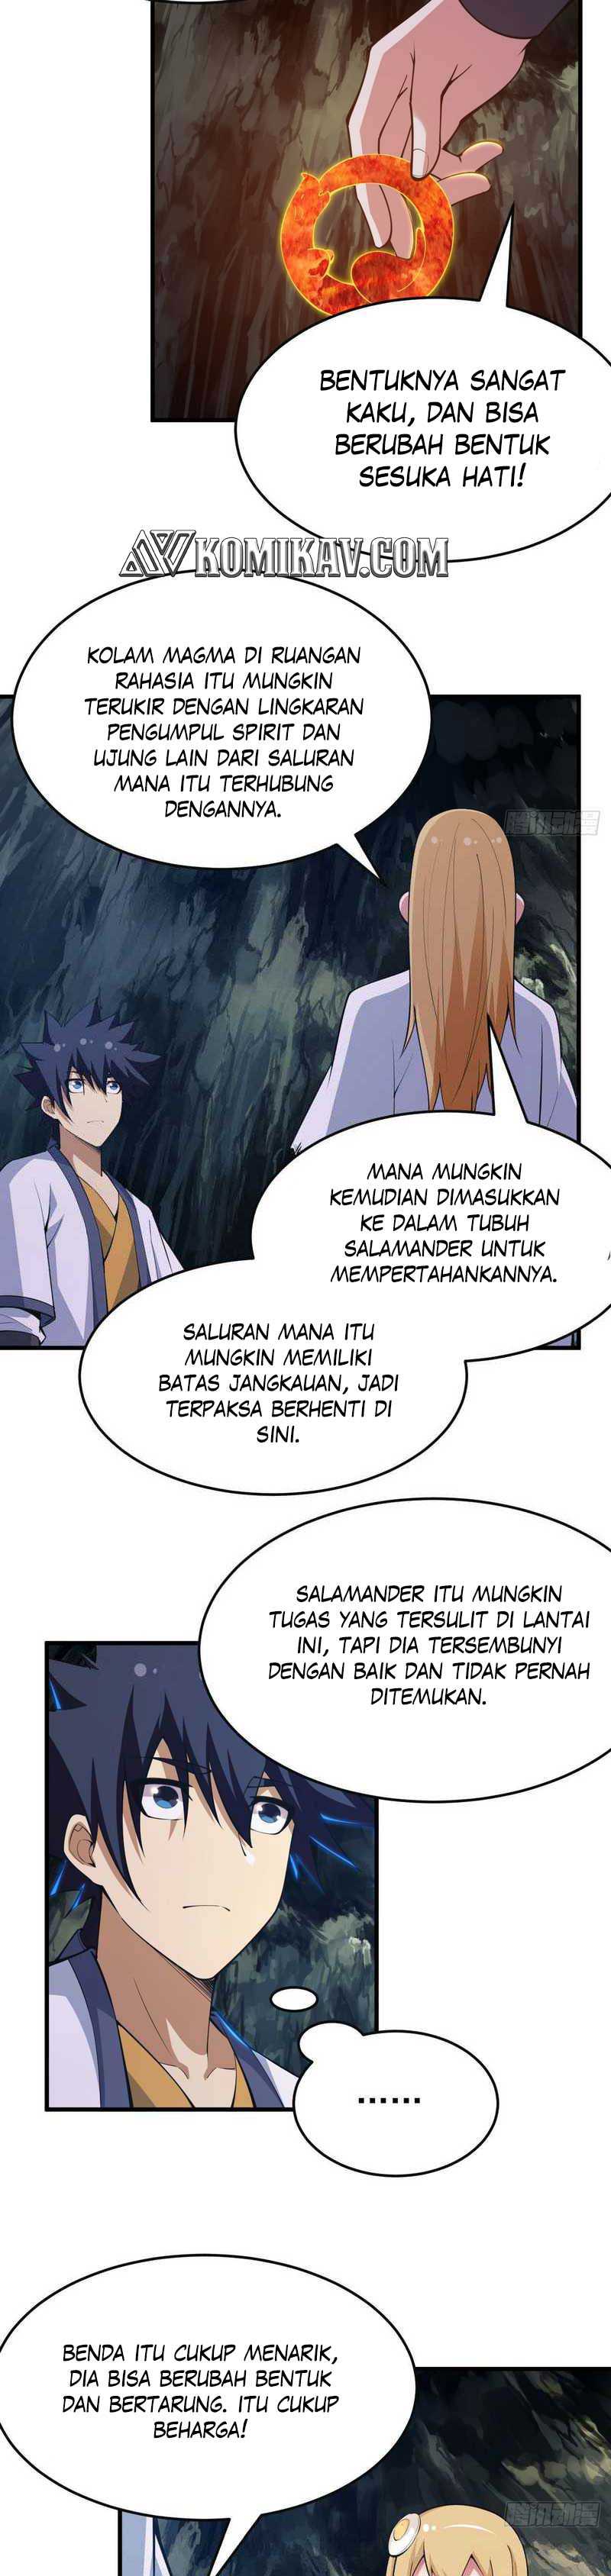 Dilarang COPAS - situs resmi www.mangacanblog.com - Komik i just want to be beaten to death by everyone 073 - chapter 73 74 Indonesia i just want to be beaten to death by everyone 073 - chapter 73 Terbaru 9|Baca Manga Komik Indonesia|Mangacan